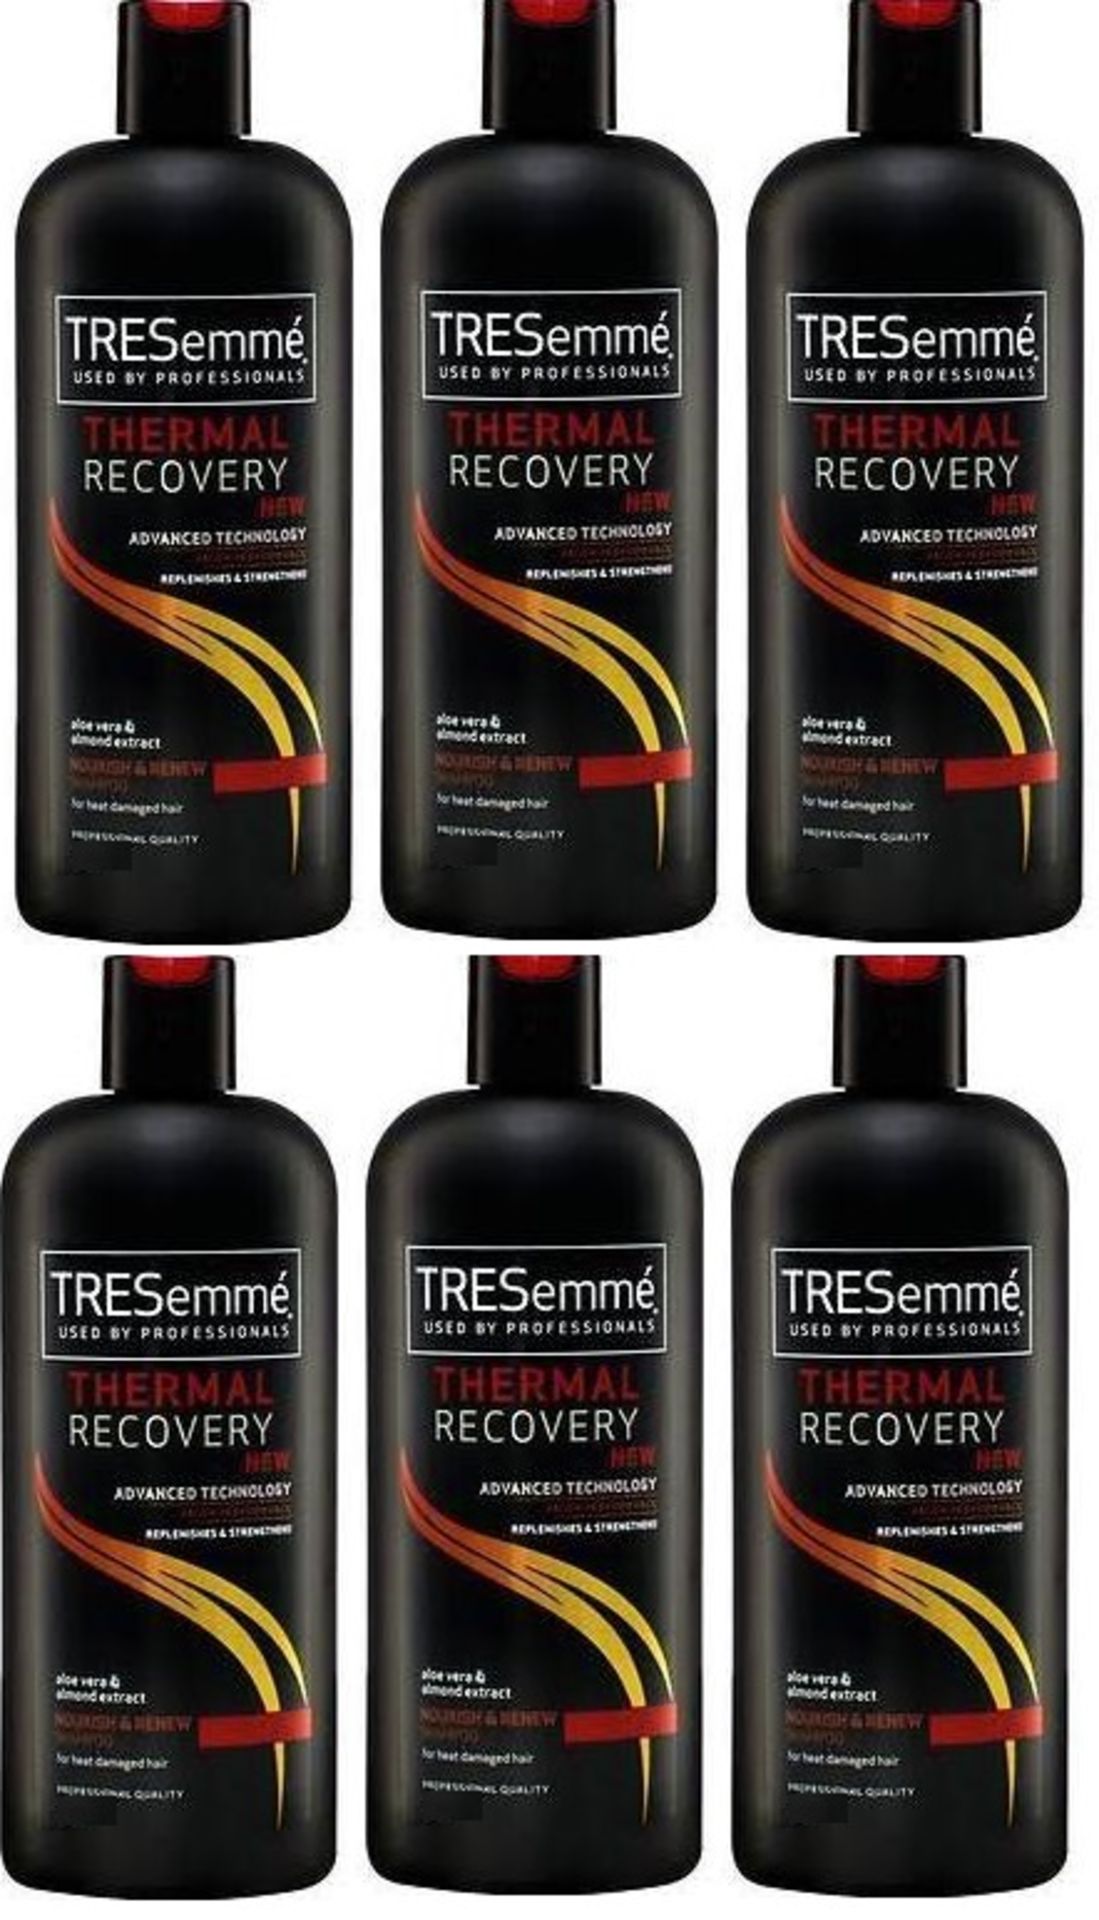 V *TRADE QTY* Brand New Lot of 6 TRESemme Professional 500ml Thermal Recovery Shampoo With Aloe Vera